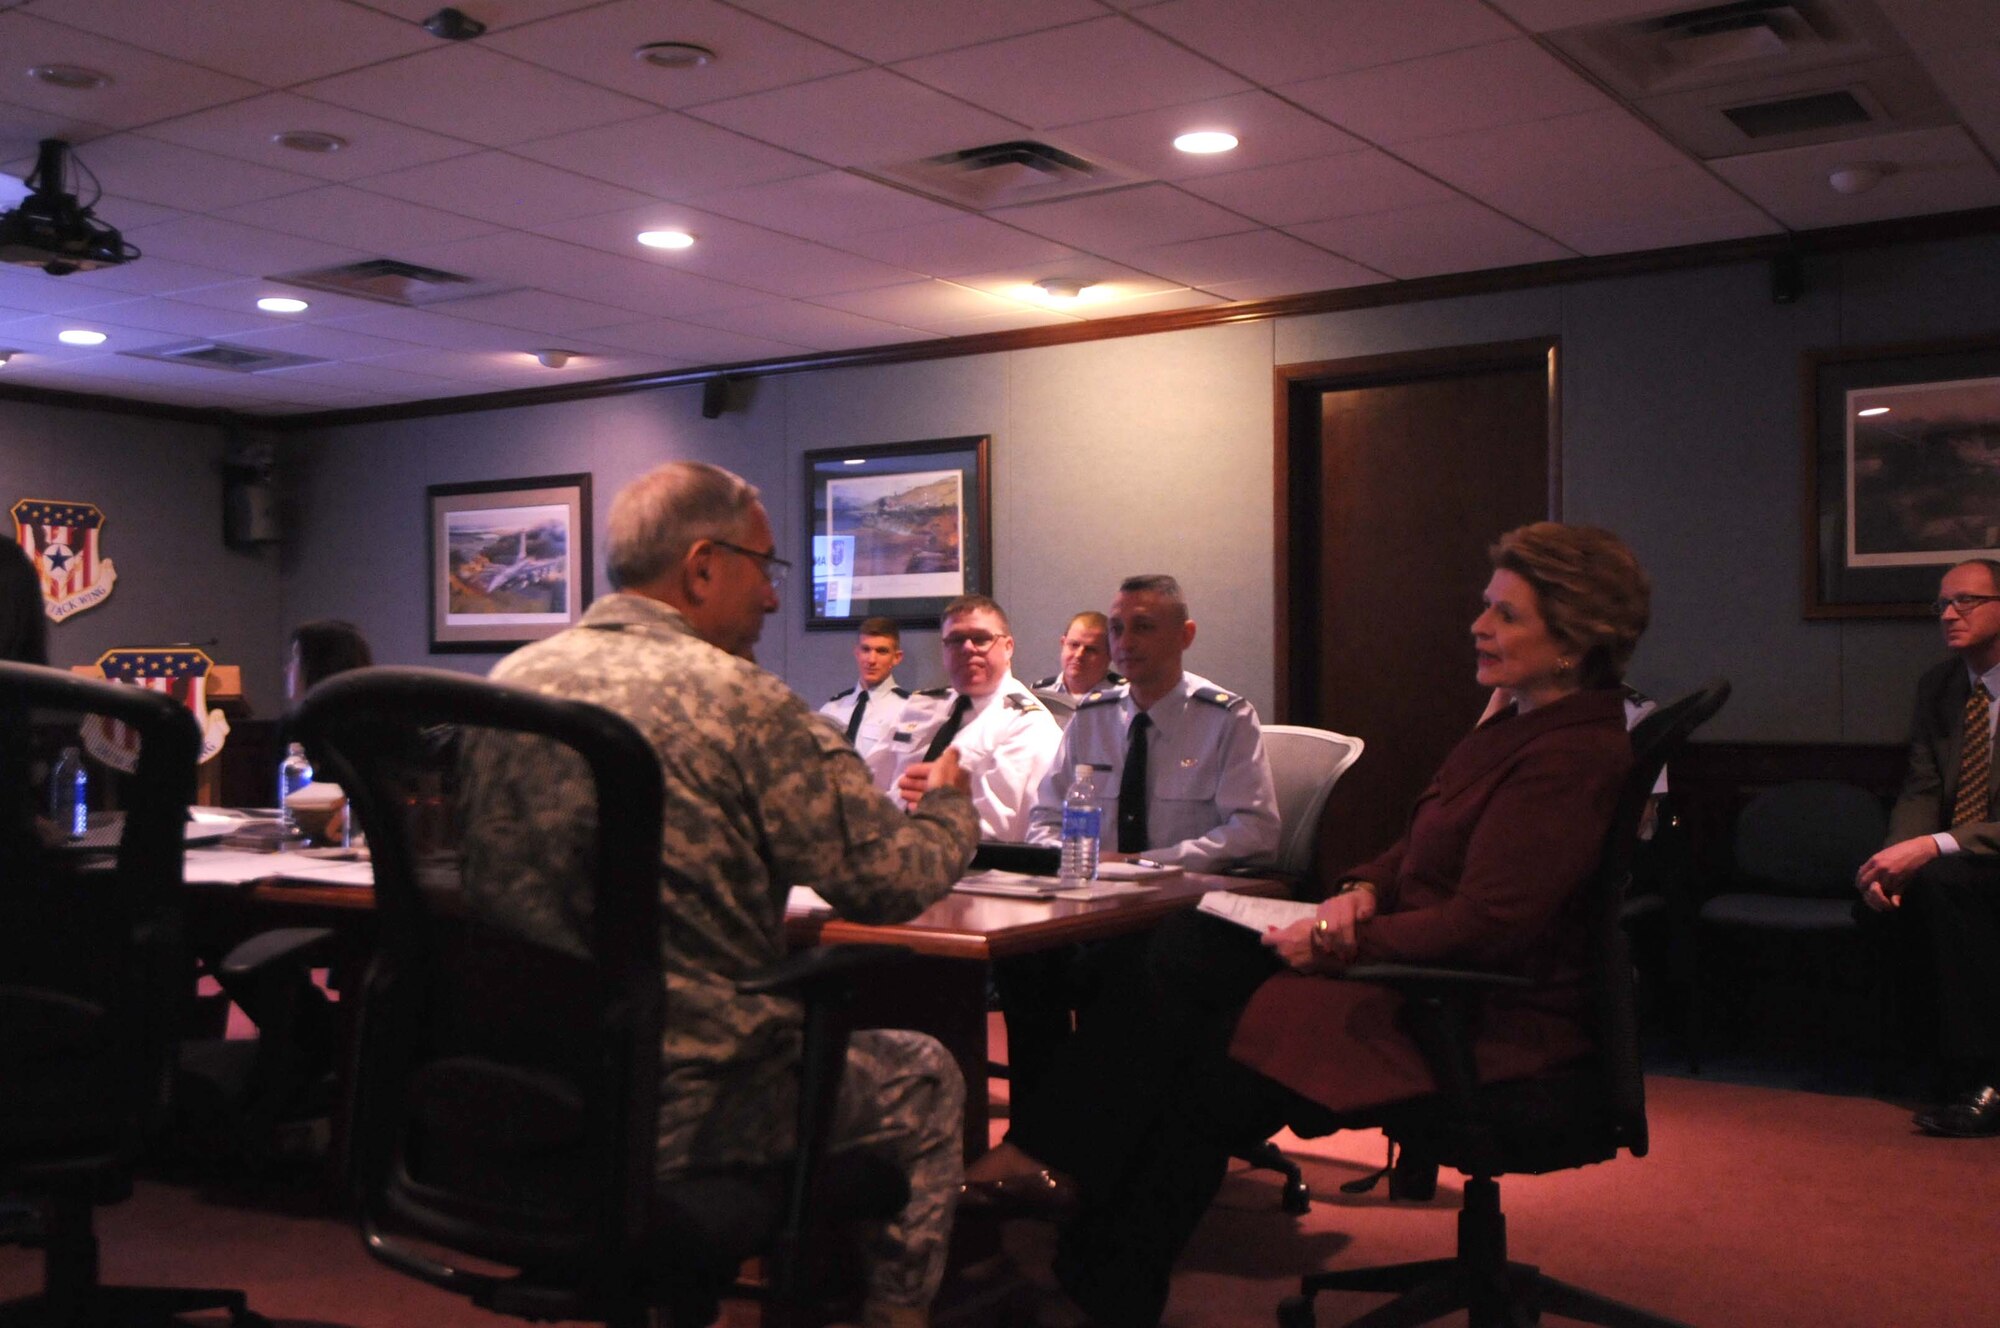 Senator Debbie Stabenow meets the troops during Presidents Day weekend, Monday, February 16, 2015, at the 110th Attack Wing, Battle Creek Air National Guard Base Mich. She received briefings from Maj. Gen. Gregory Vadnais, Adjutant General of Michigan, Col. Ronald Wilson, 110th Attack Wing Commander, and Lt. Col. Mark Gorzynski, Ft. Custer Training Center Post Commander.(U.S. Air National Guard photo by Master Sgt. Sonia Pawloski/Released)
